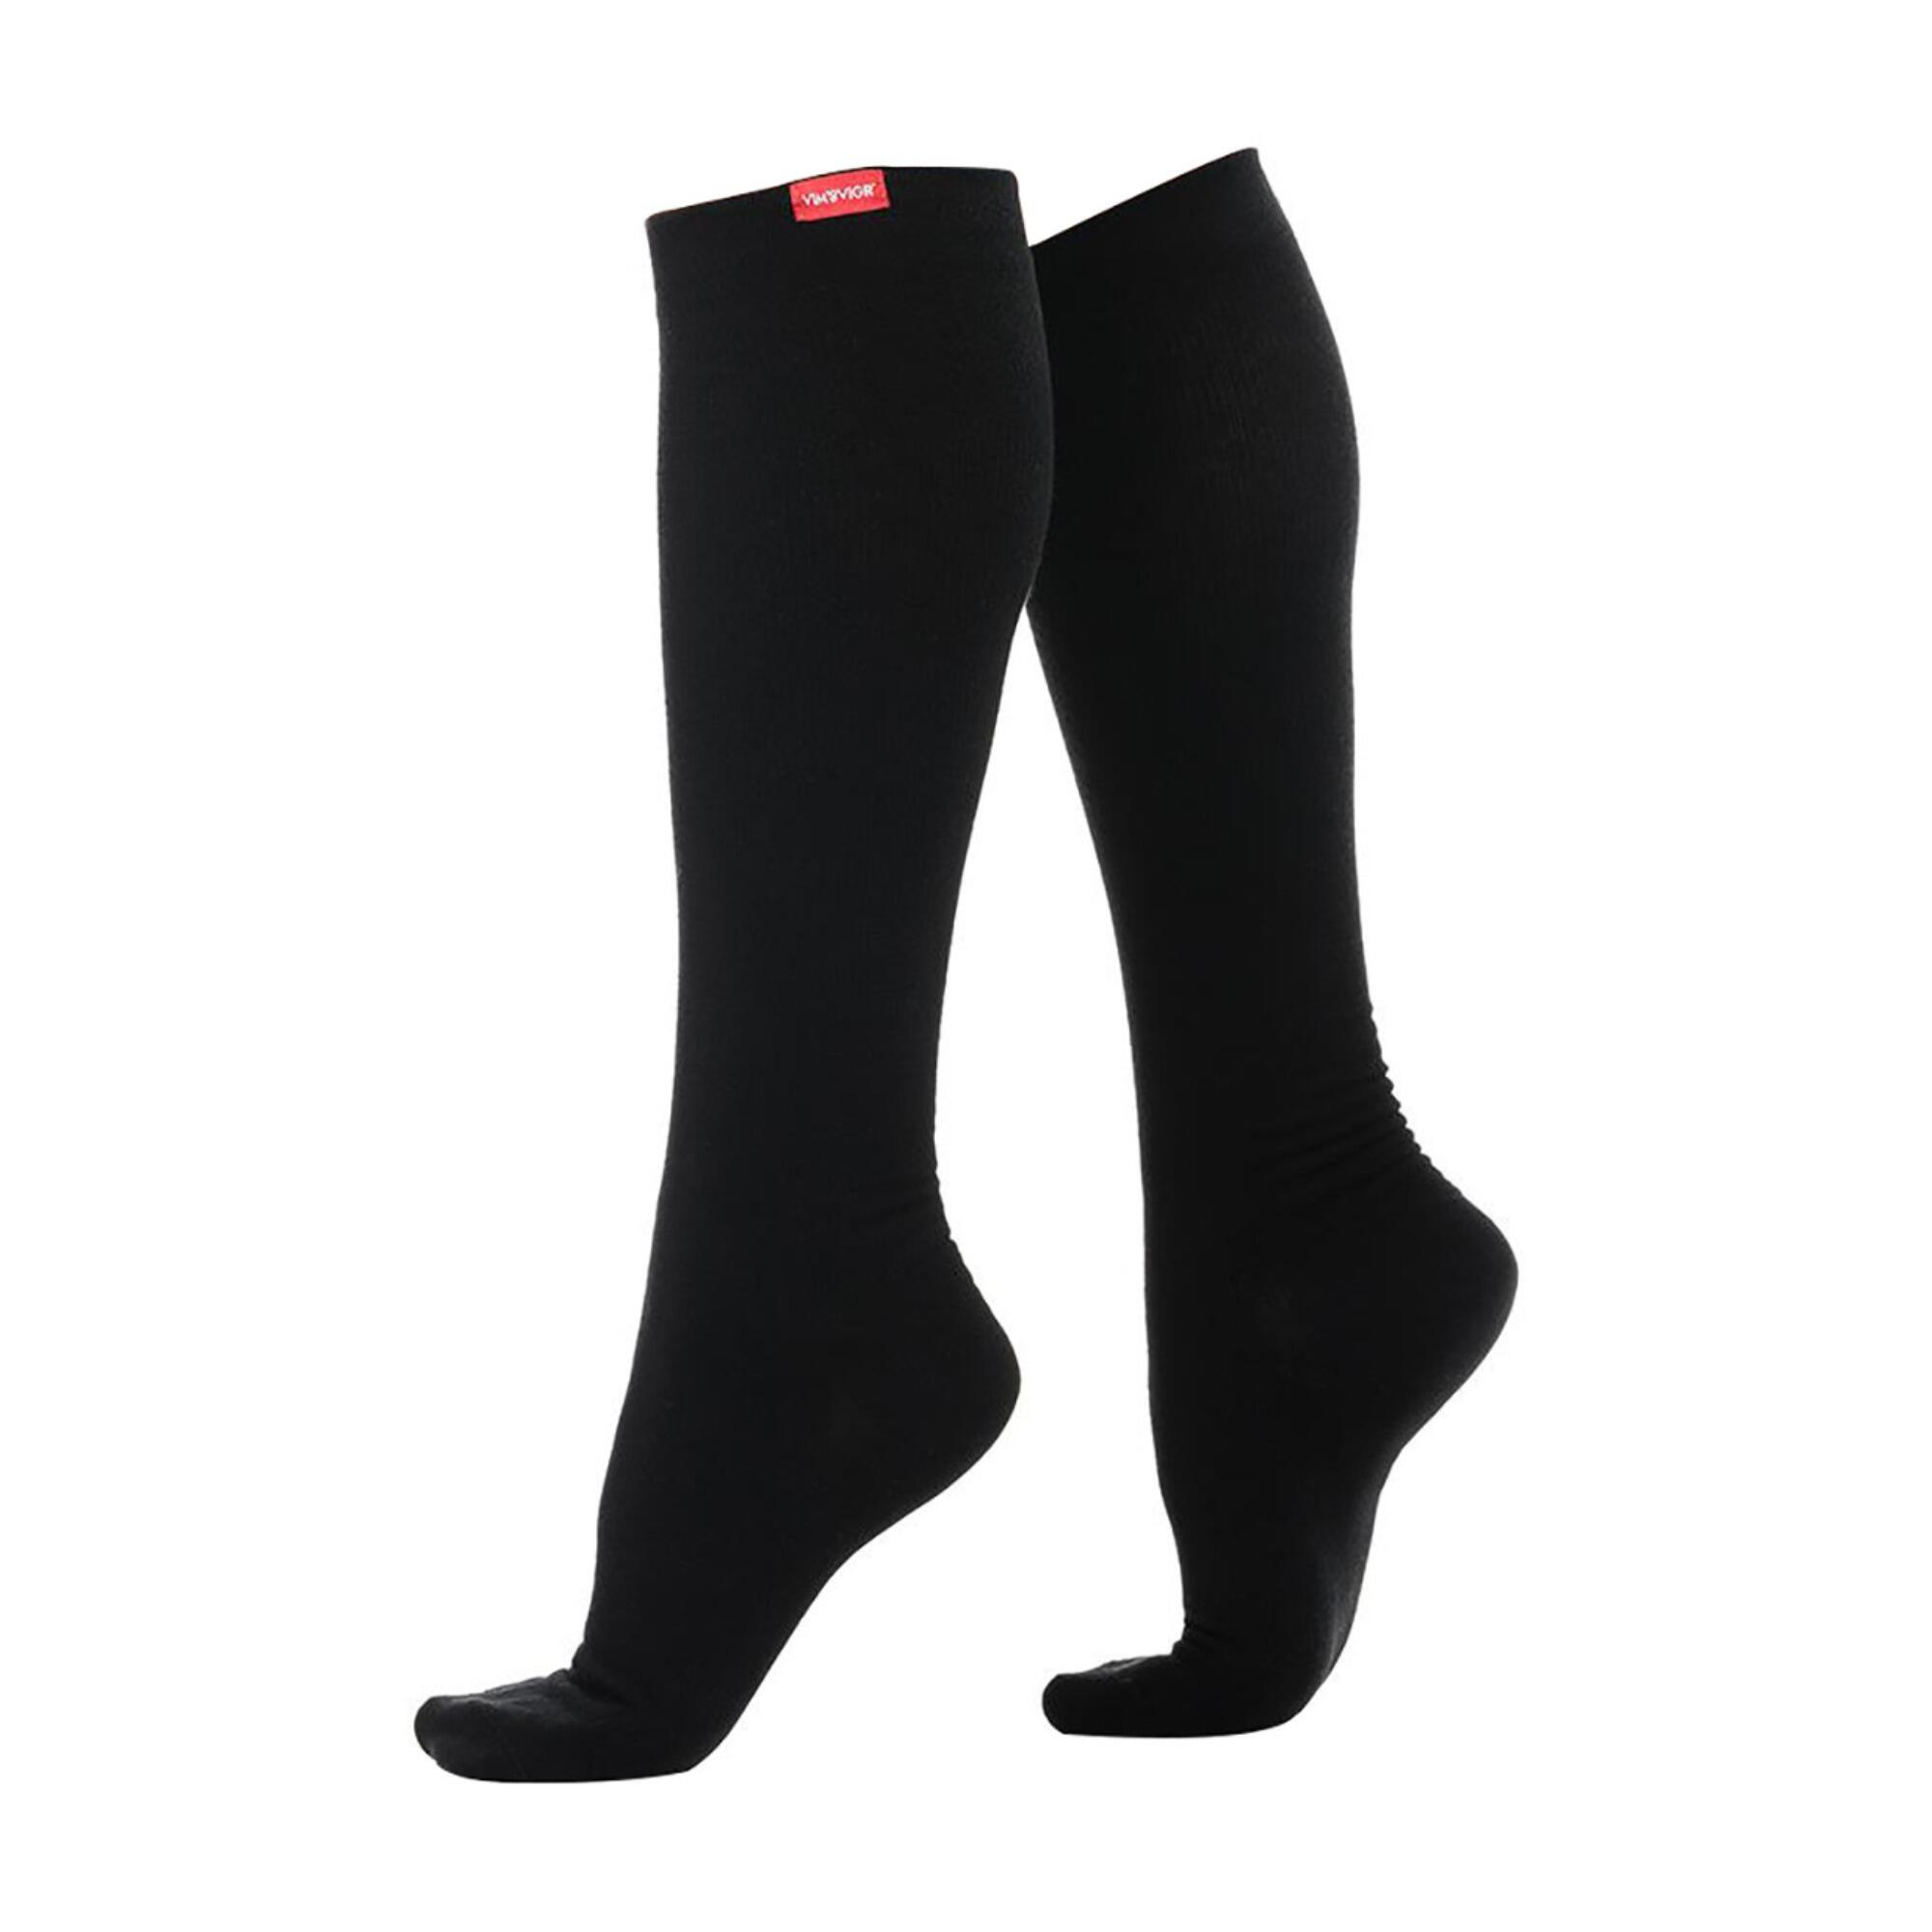 What Are Graduated Compression Stockings & How Do They Work? – VIM